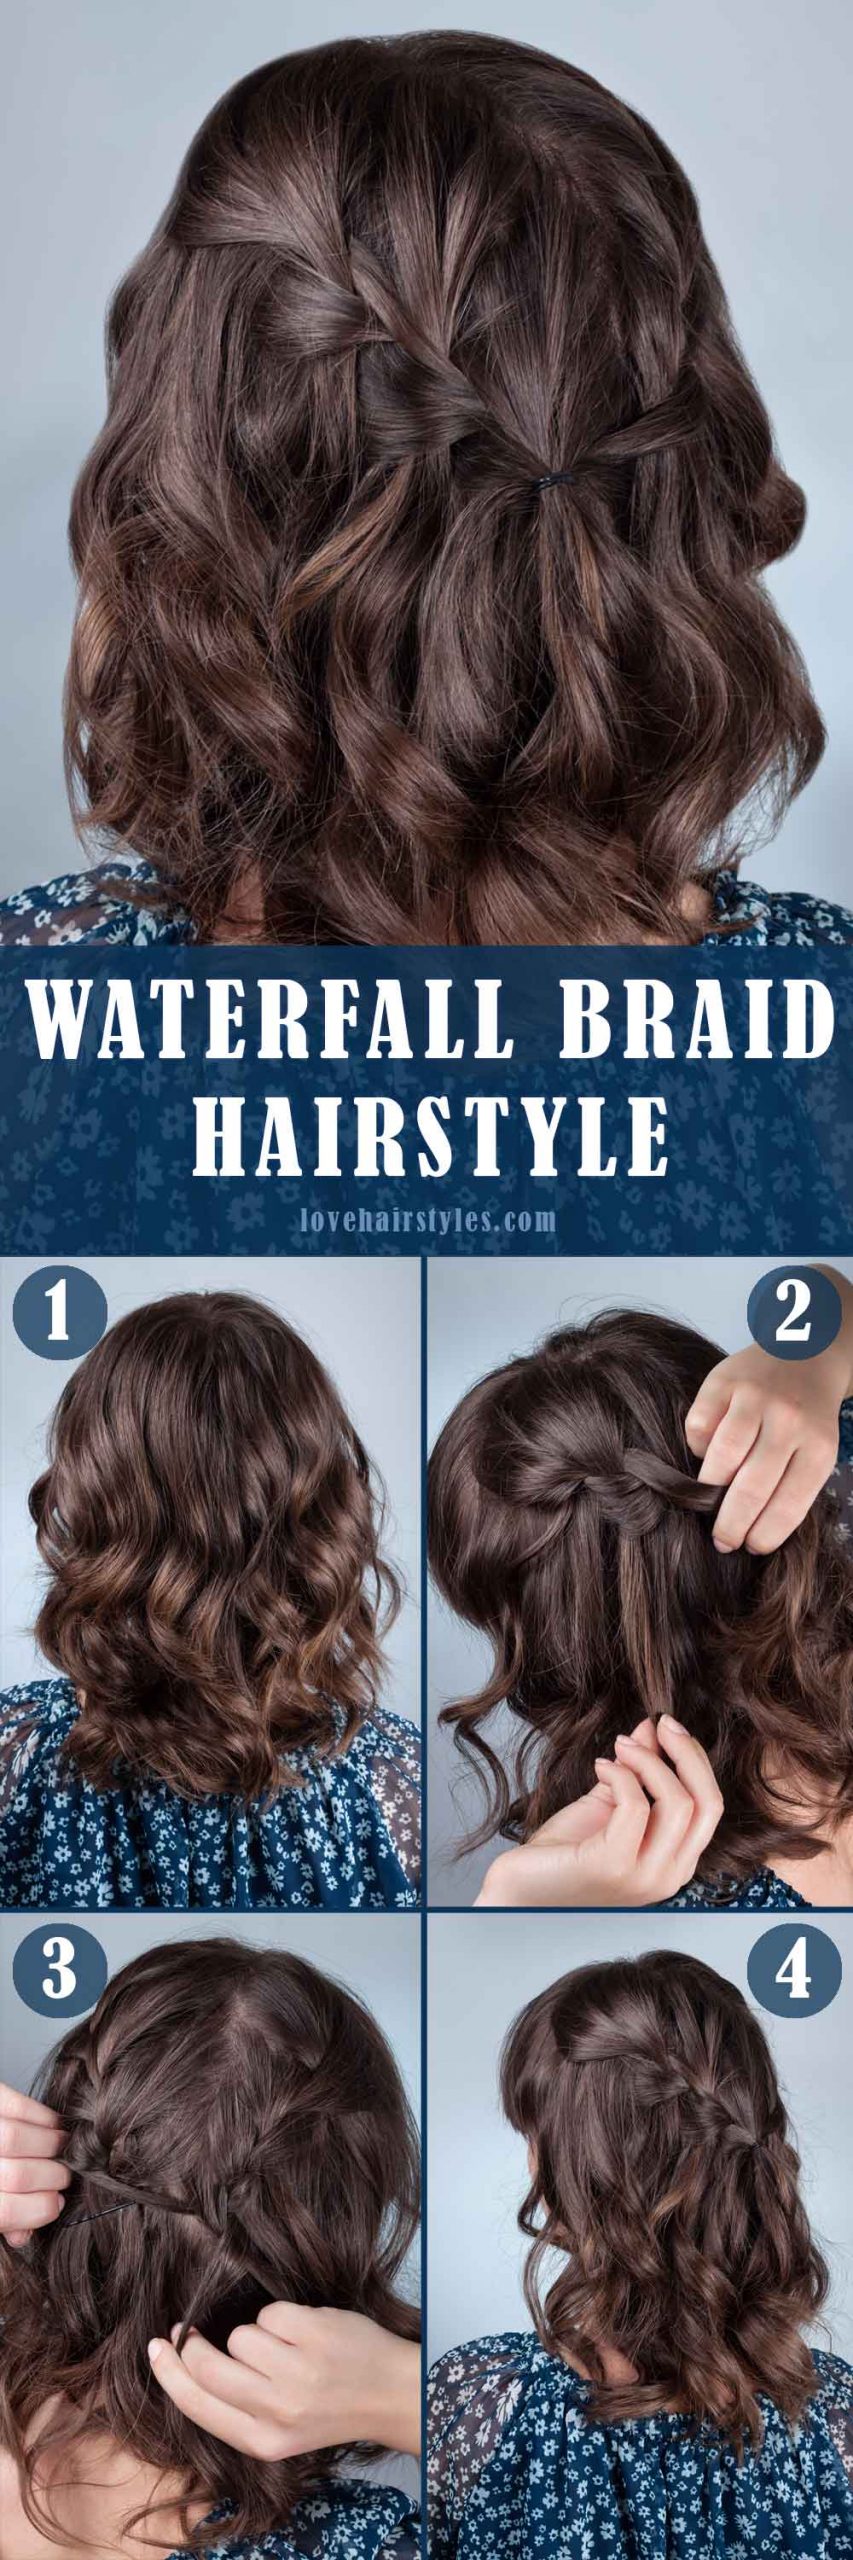 10 Flattering Hairstyles For Medium And Shoulder Length Hair